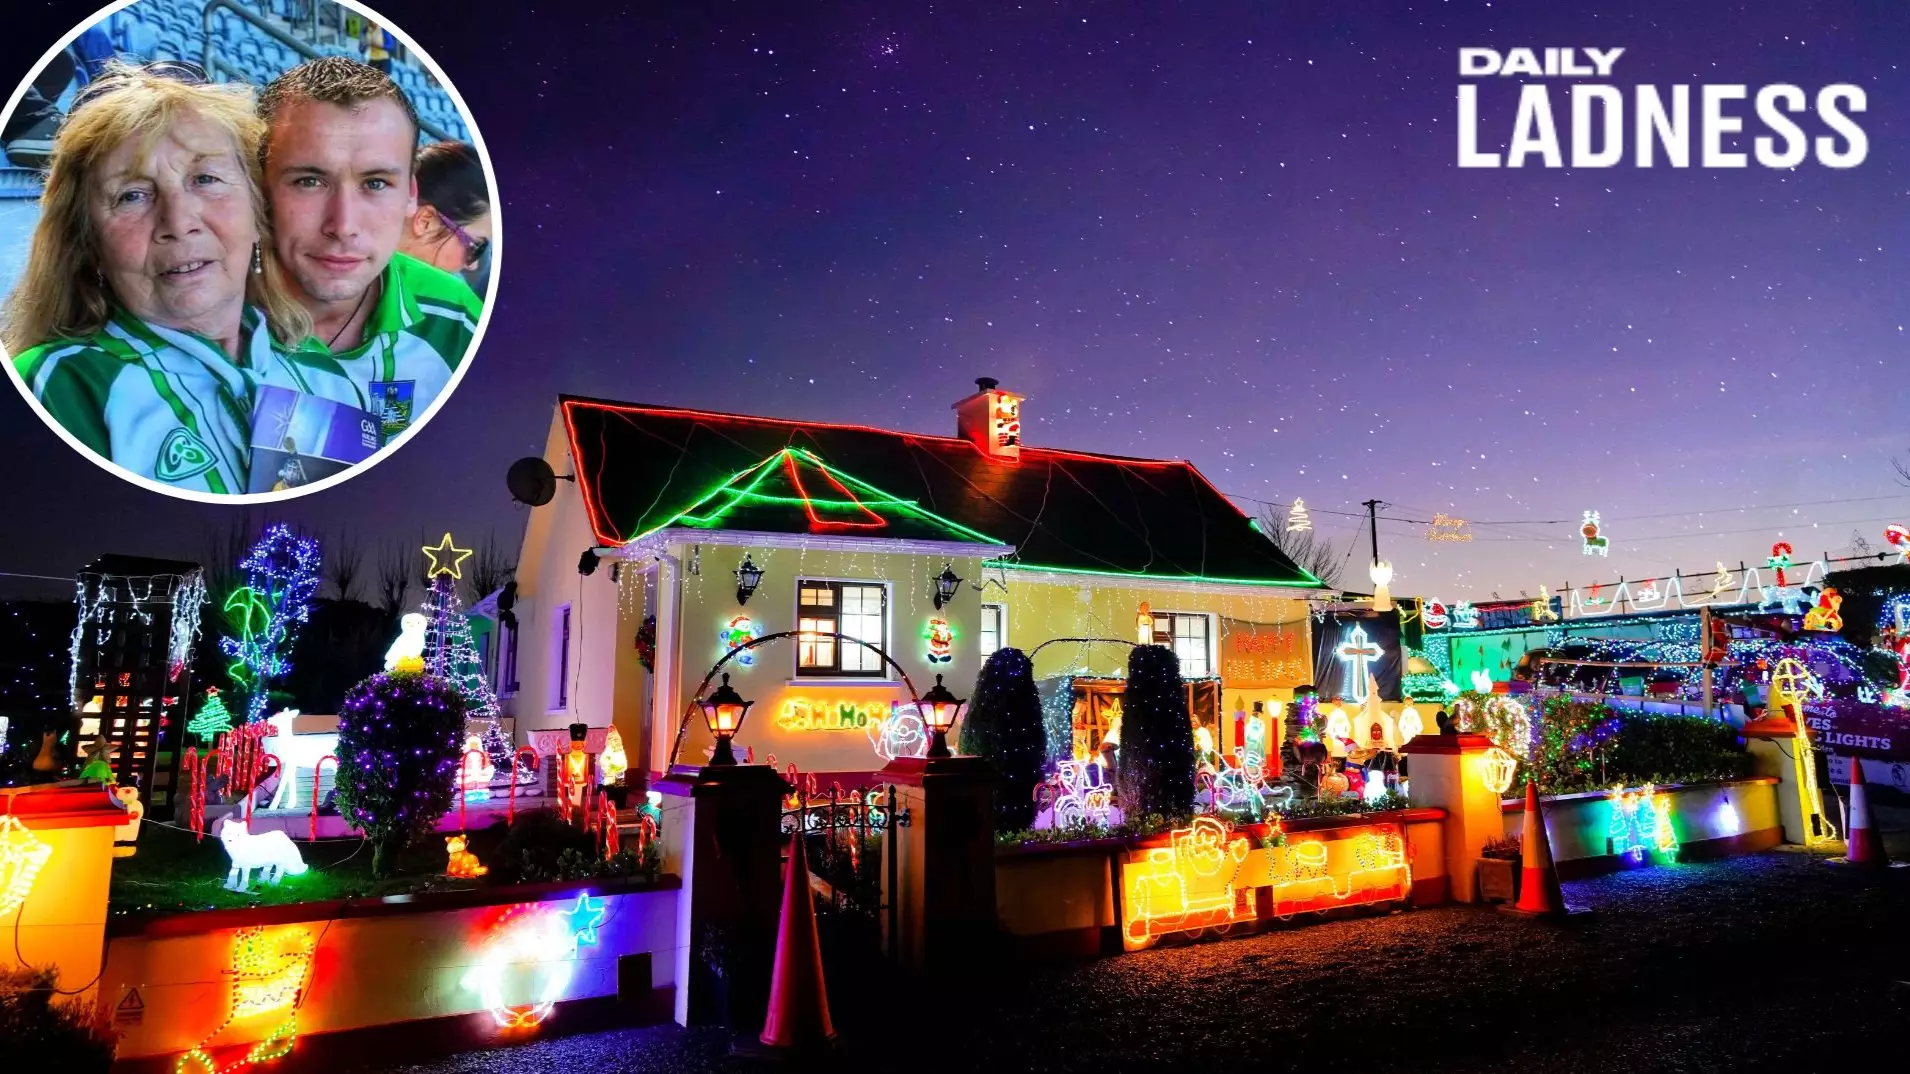 LAD Decorates House With 200,000 Christmas Lights In Memory Of Dad